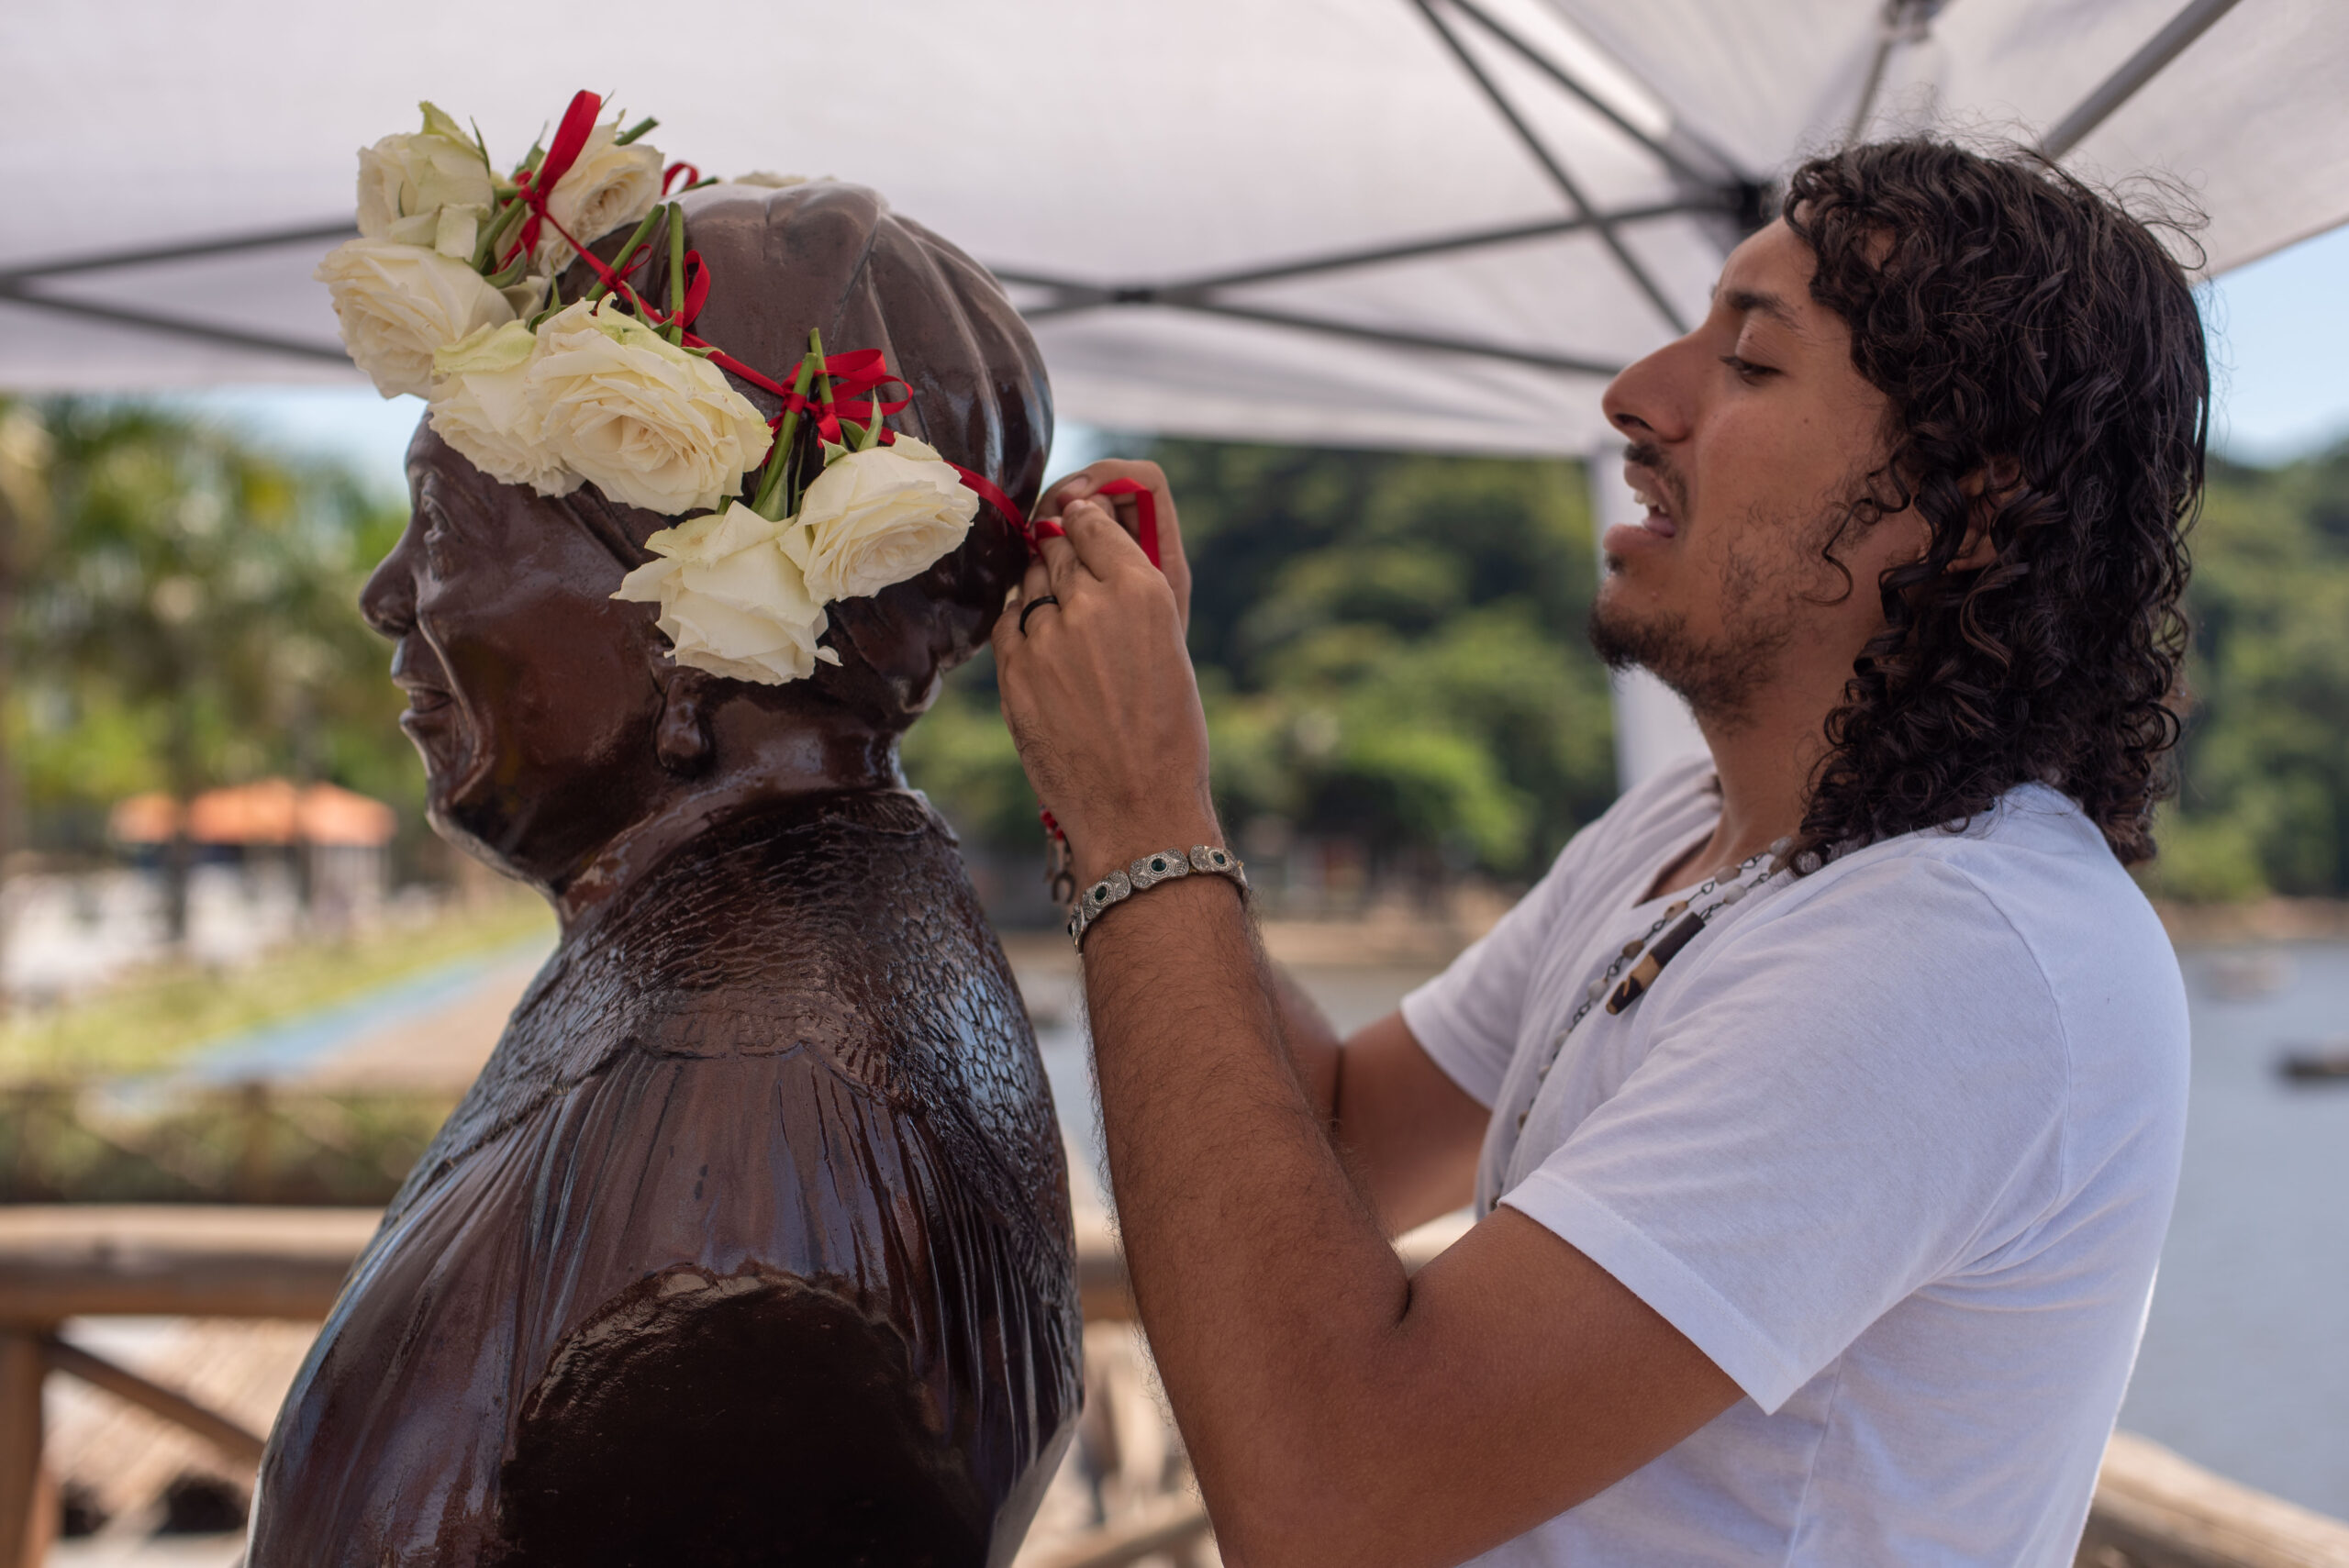 Marcos Cesar, one of the event organizers, crowning the bust of Maria Conga in a bid to repair the act of vandalism toward the bust several days earlier. Photo: Bárbara Dias